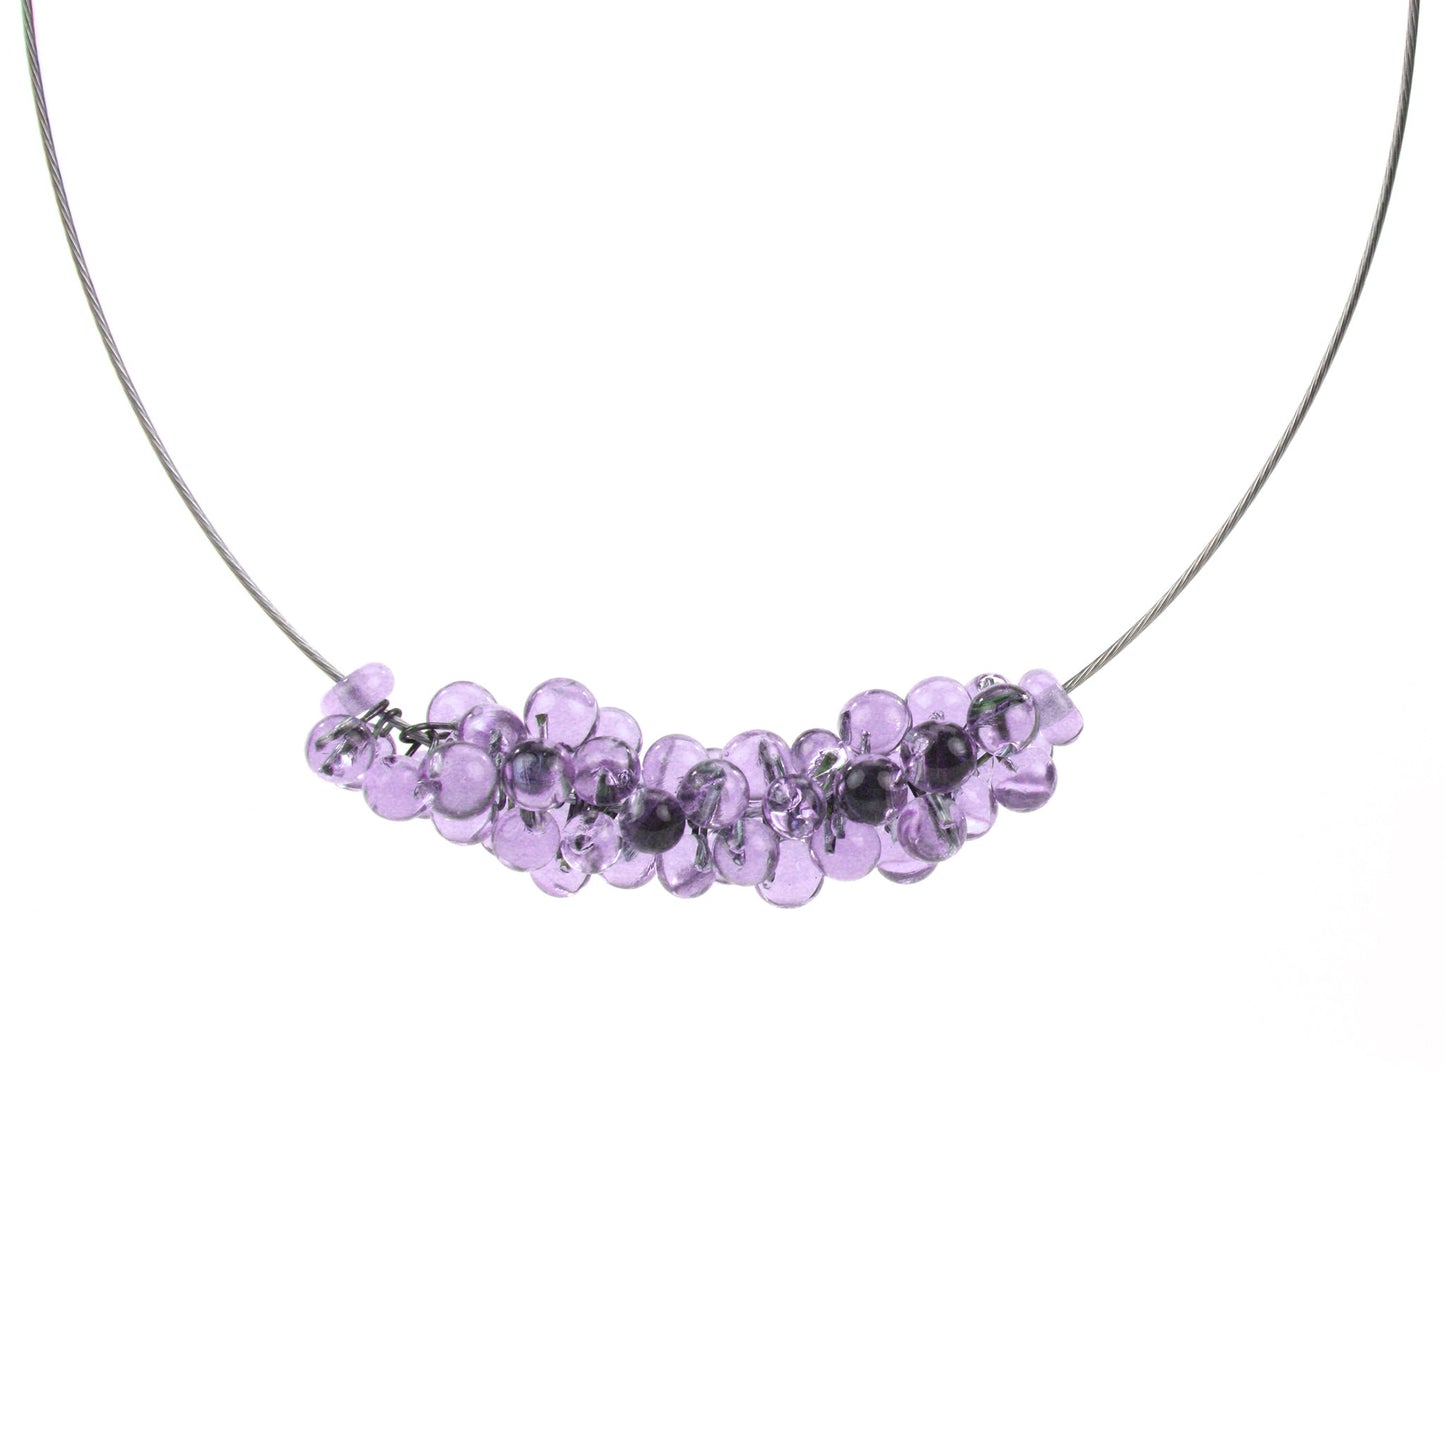 Petite Chroma Necklace in Purple/Blue - color changing